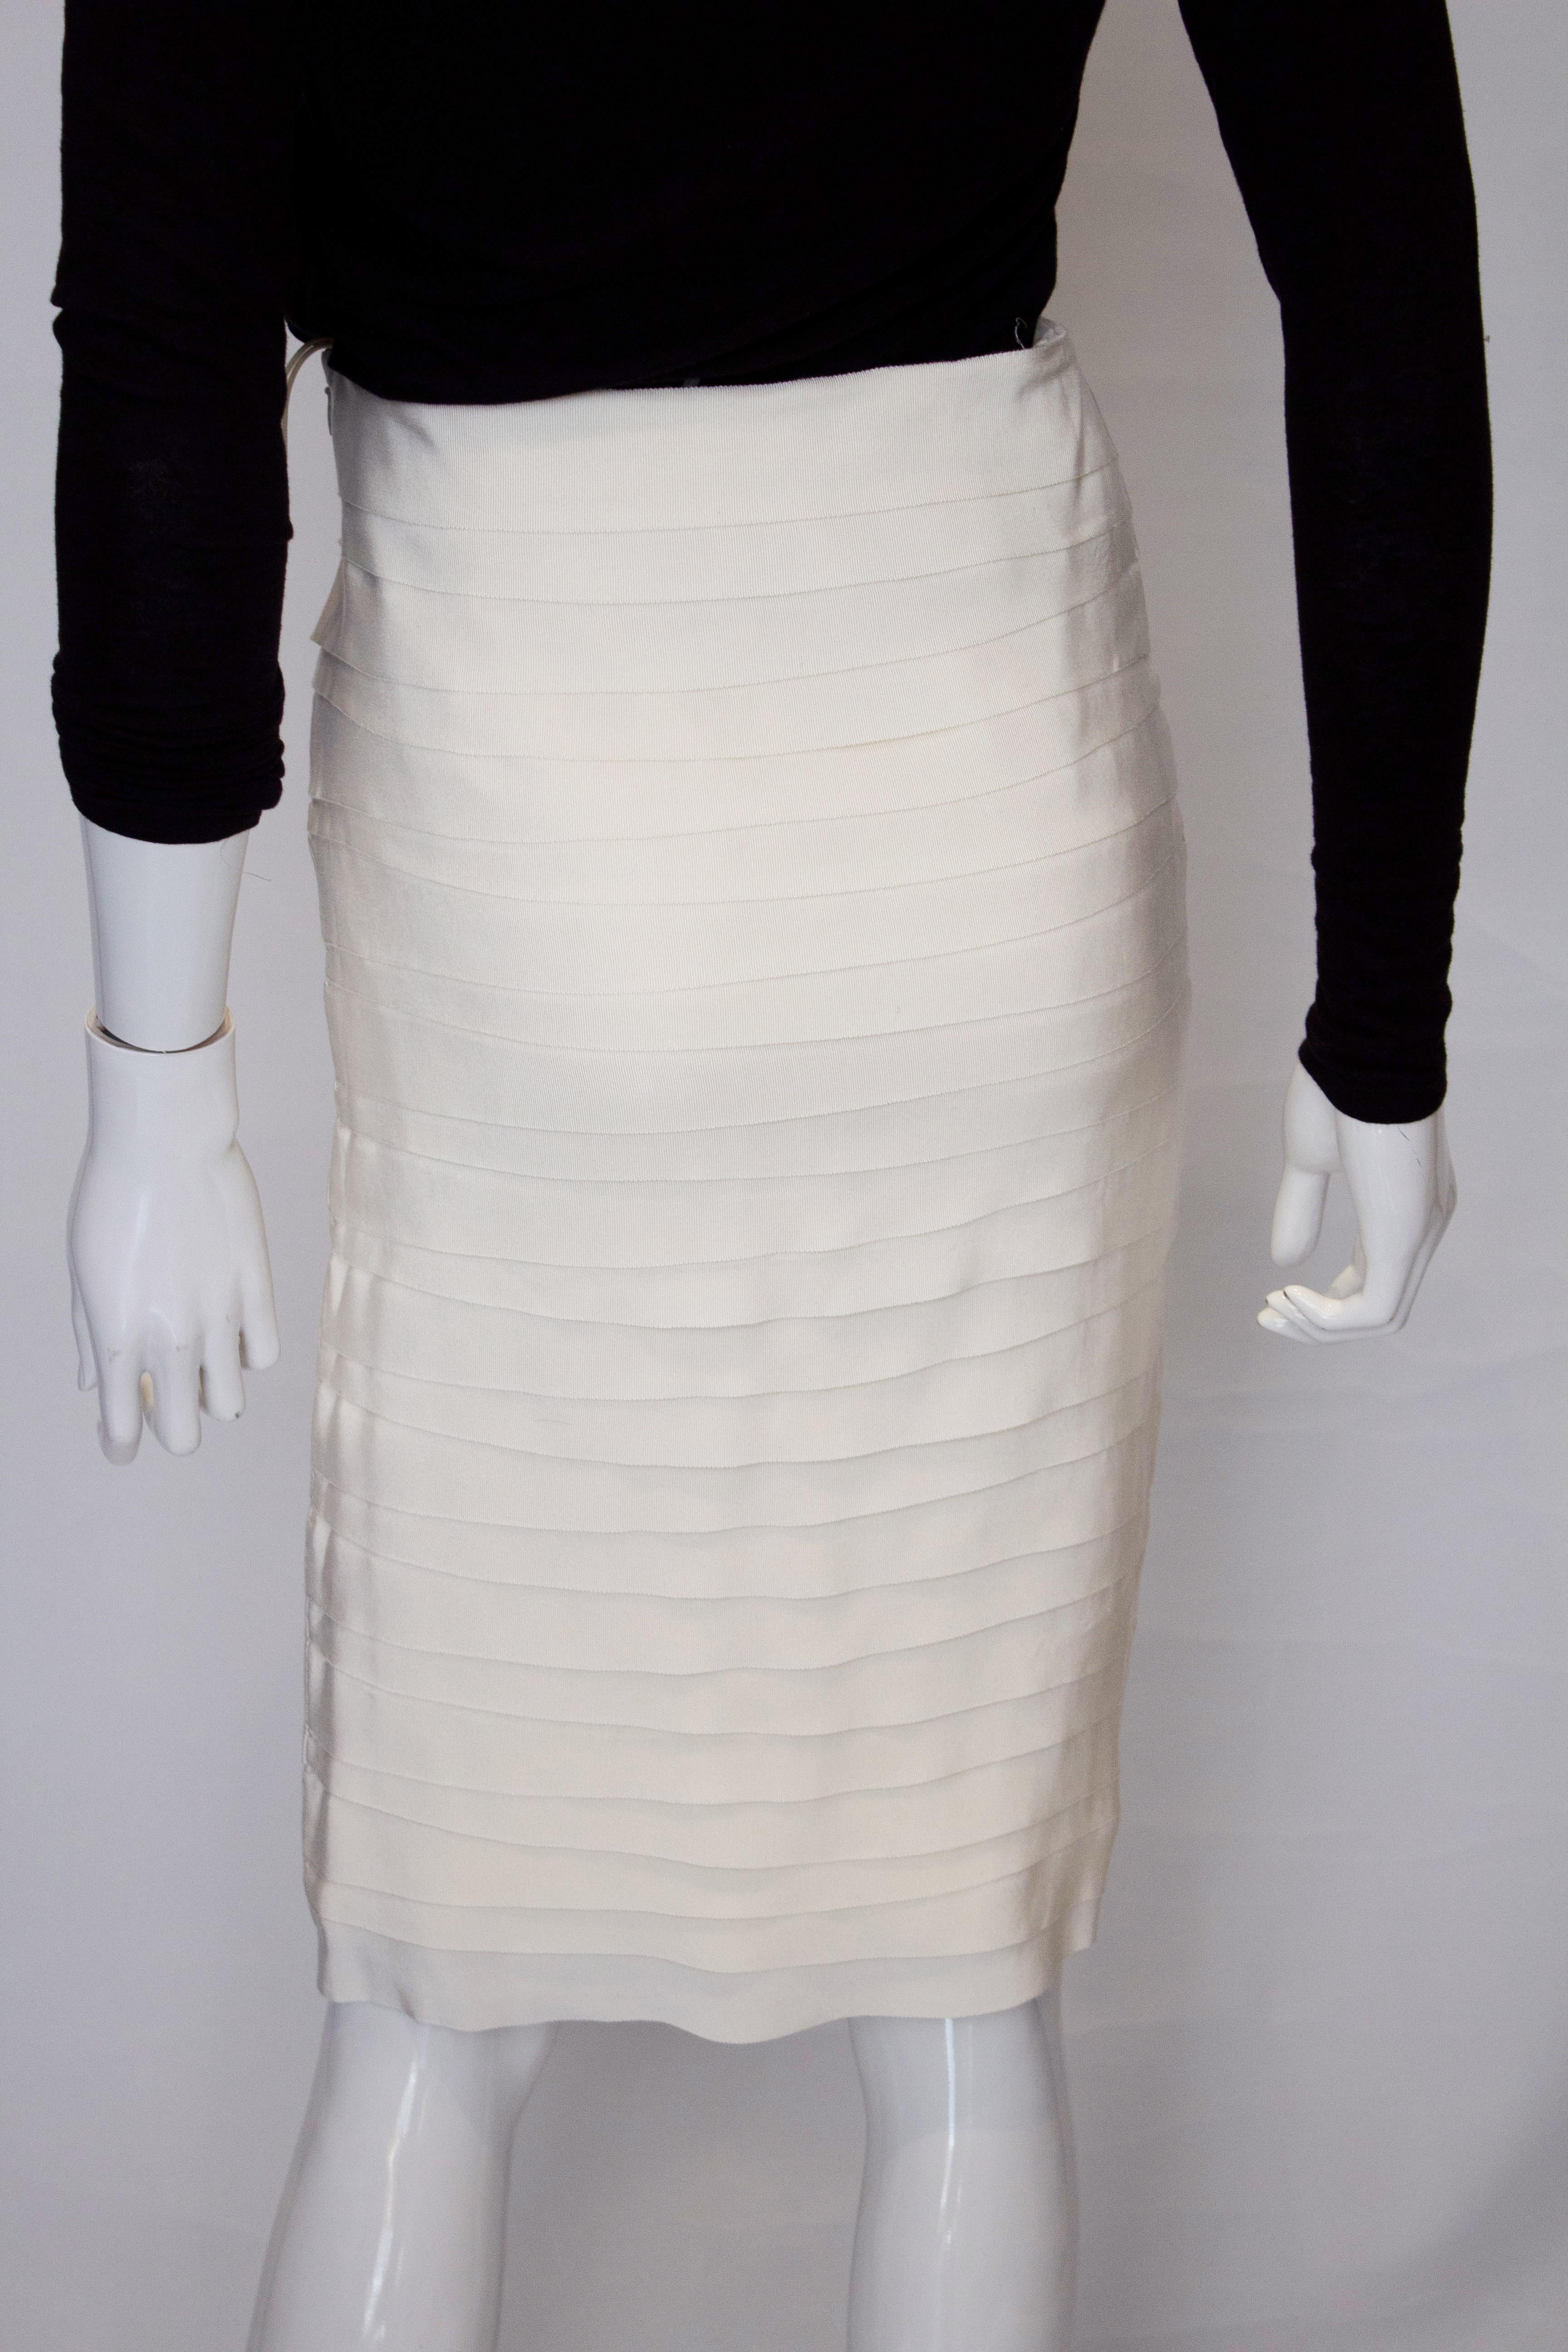 A chic vintage white skirt by Ferragamo. The skirt is made of horizontal rows of fabric with a zip opening on the left hand side.  It is fully lined.